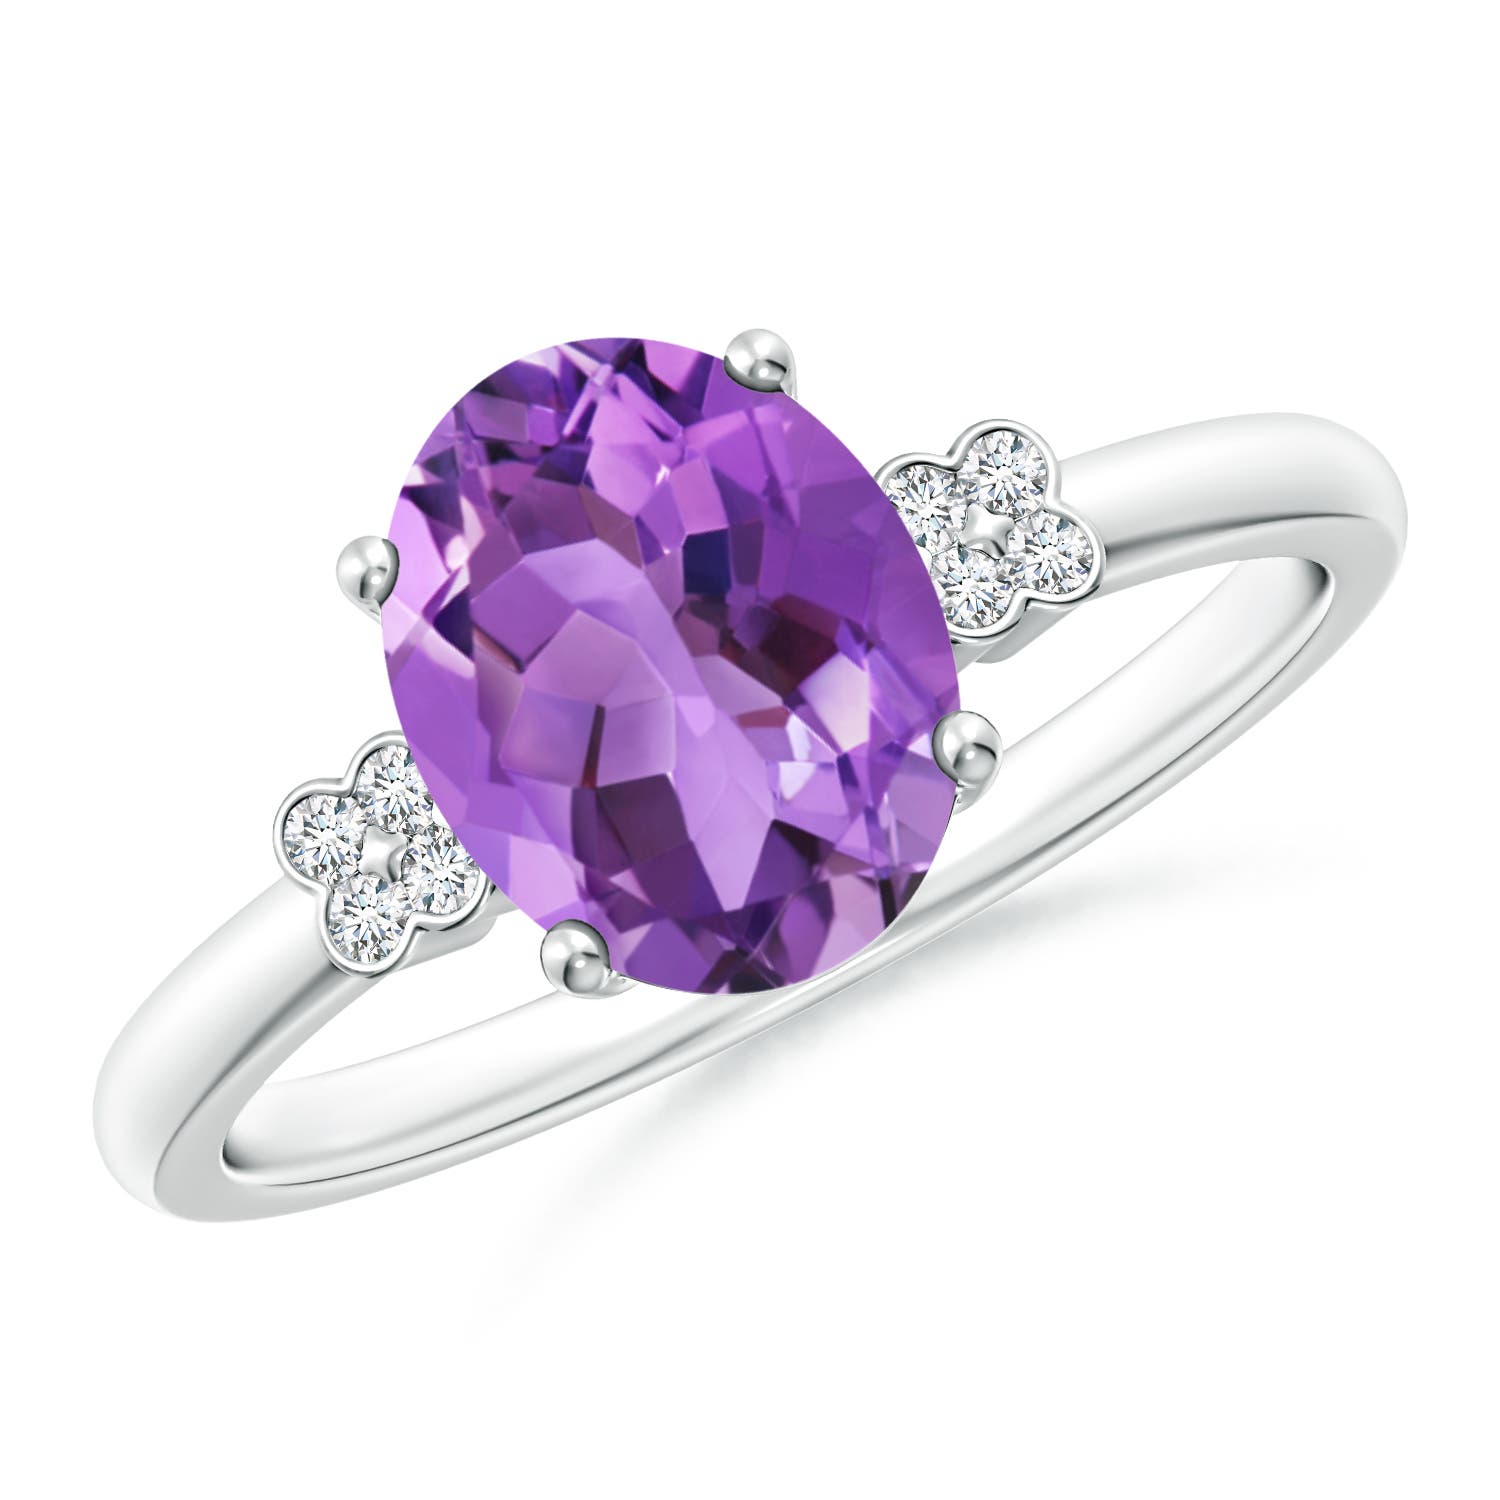 AA- Amethyst / 1.66 CT / 14 KT White Gold